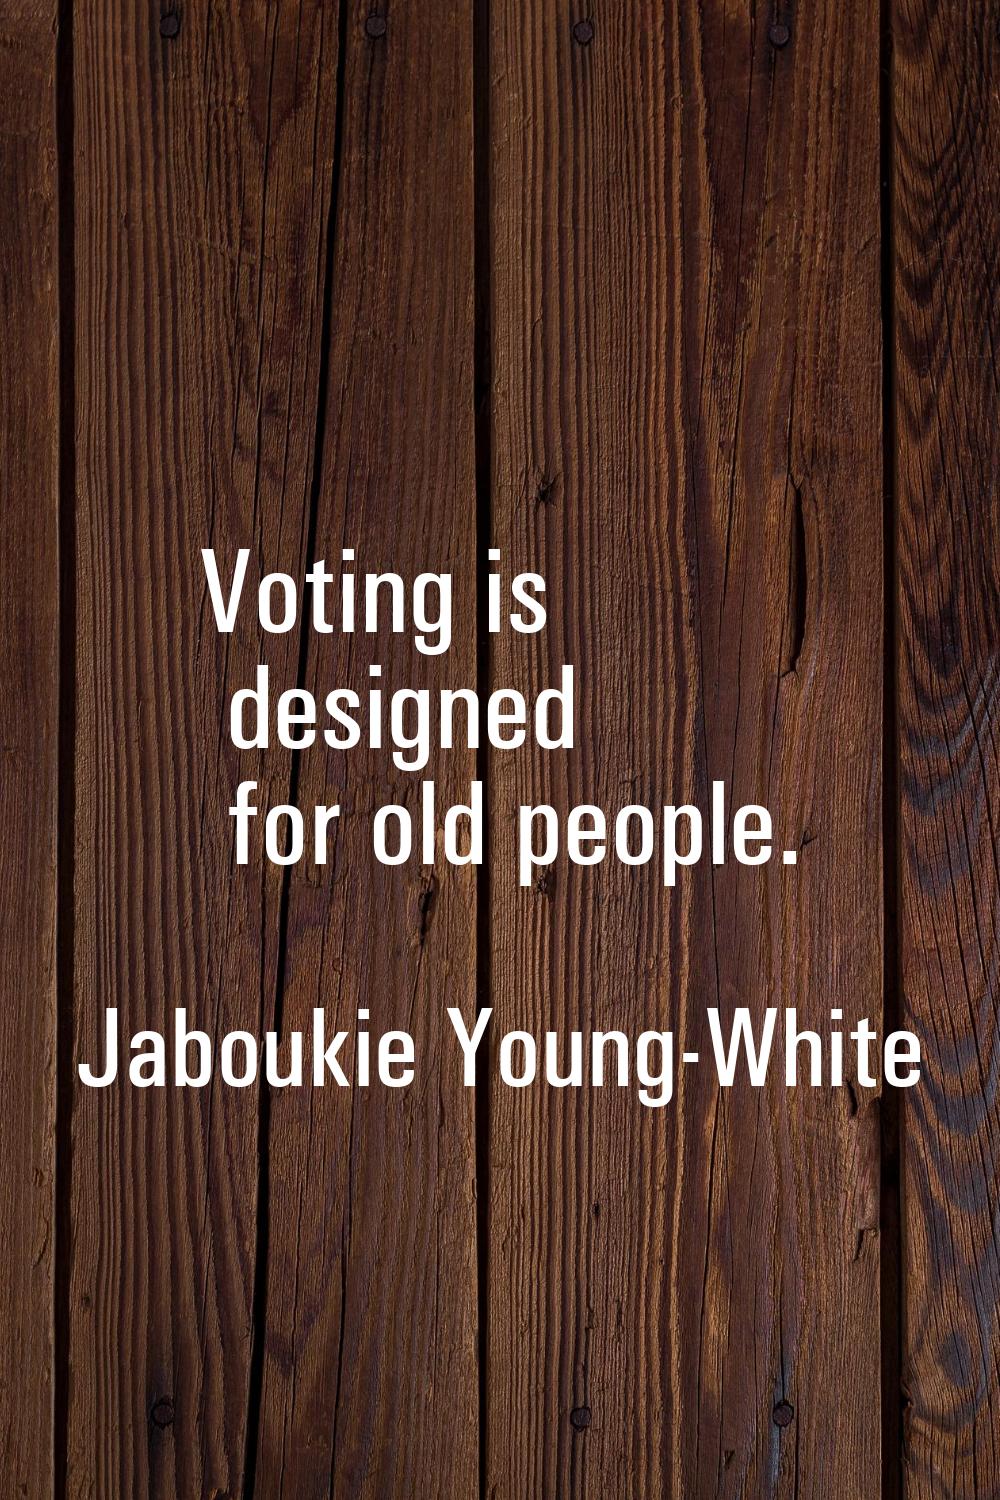 Voting is designed for old people.